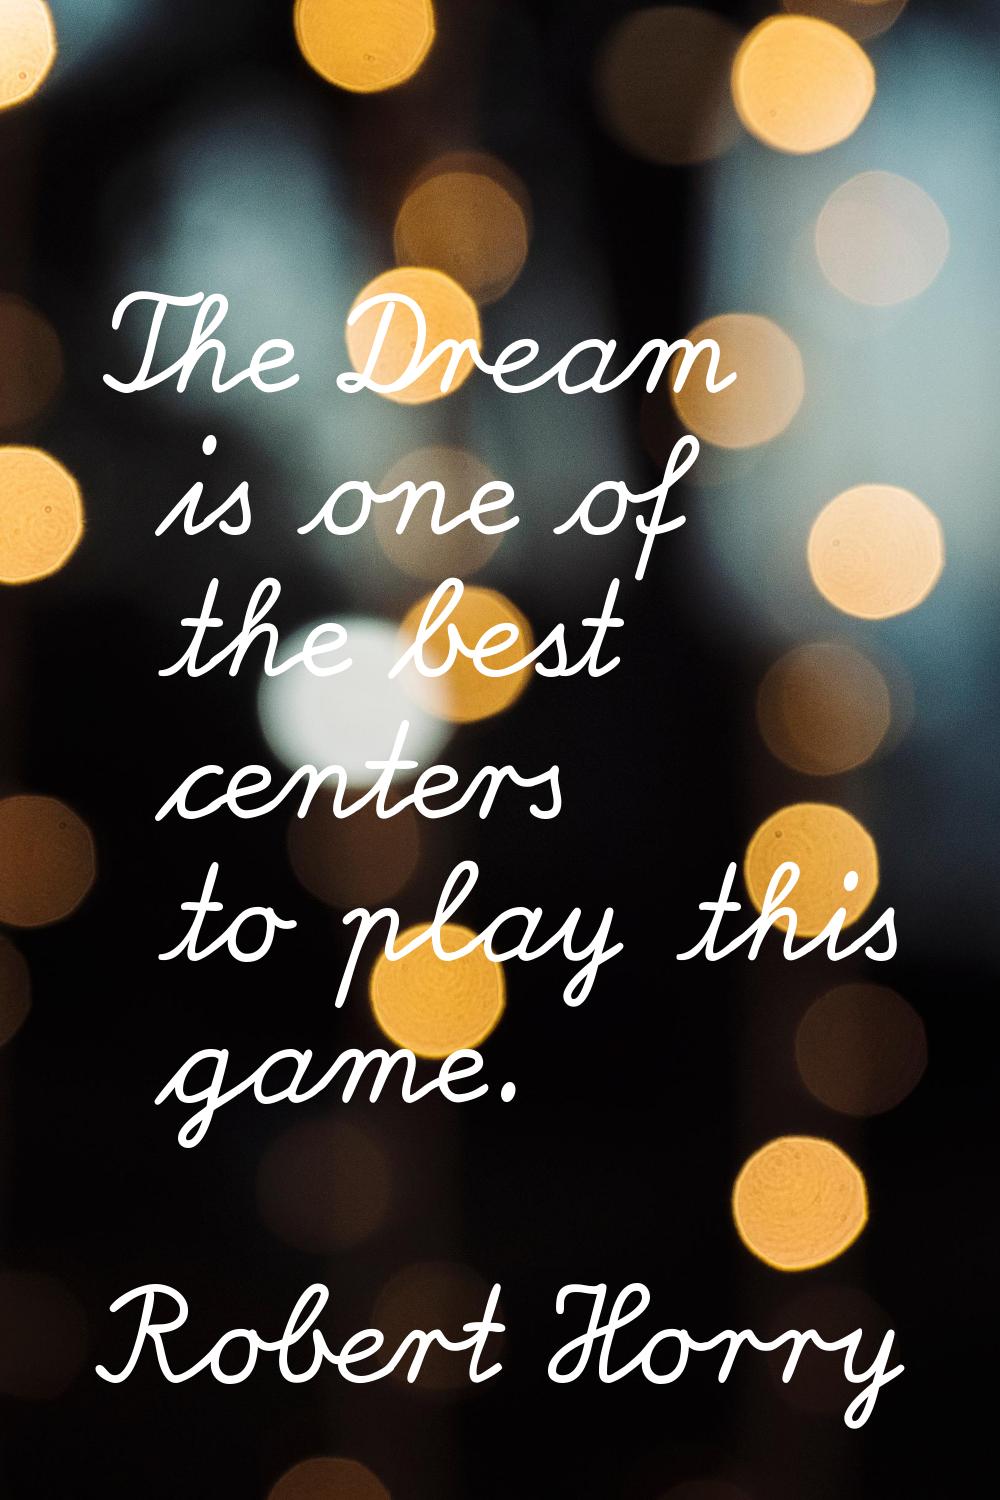 The Dream is one of the best centers to play this game.